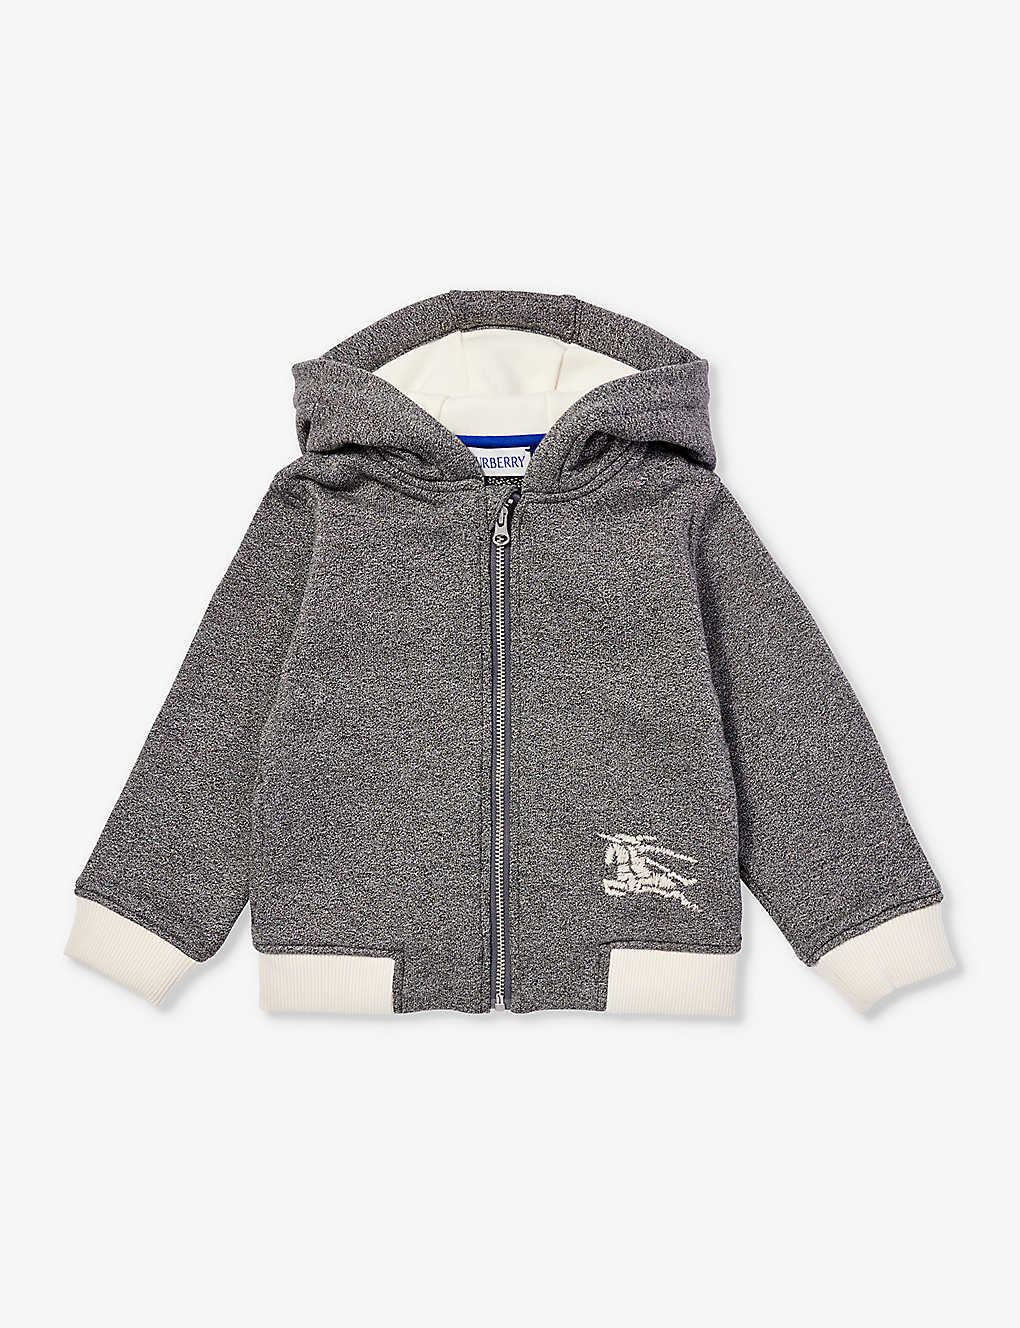 Burberry Babies'  Charcoal Grey Melang Box Brand-embroidered Cotton-jersey Hoody 12 Months -